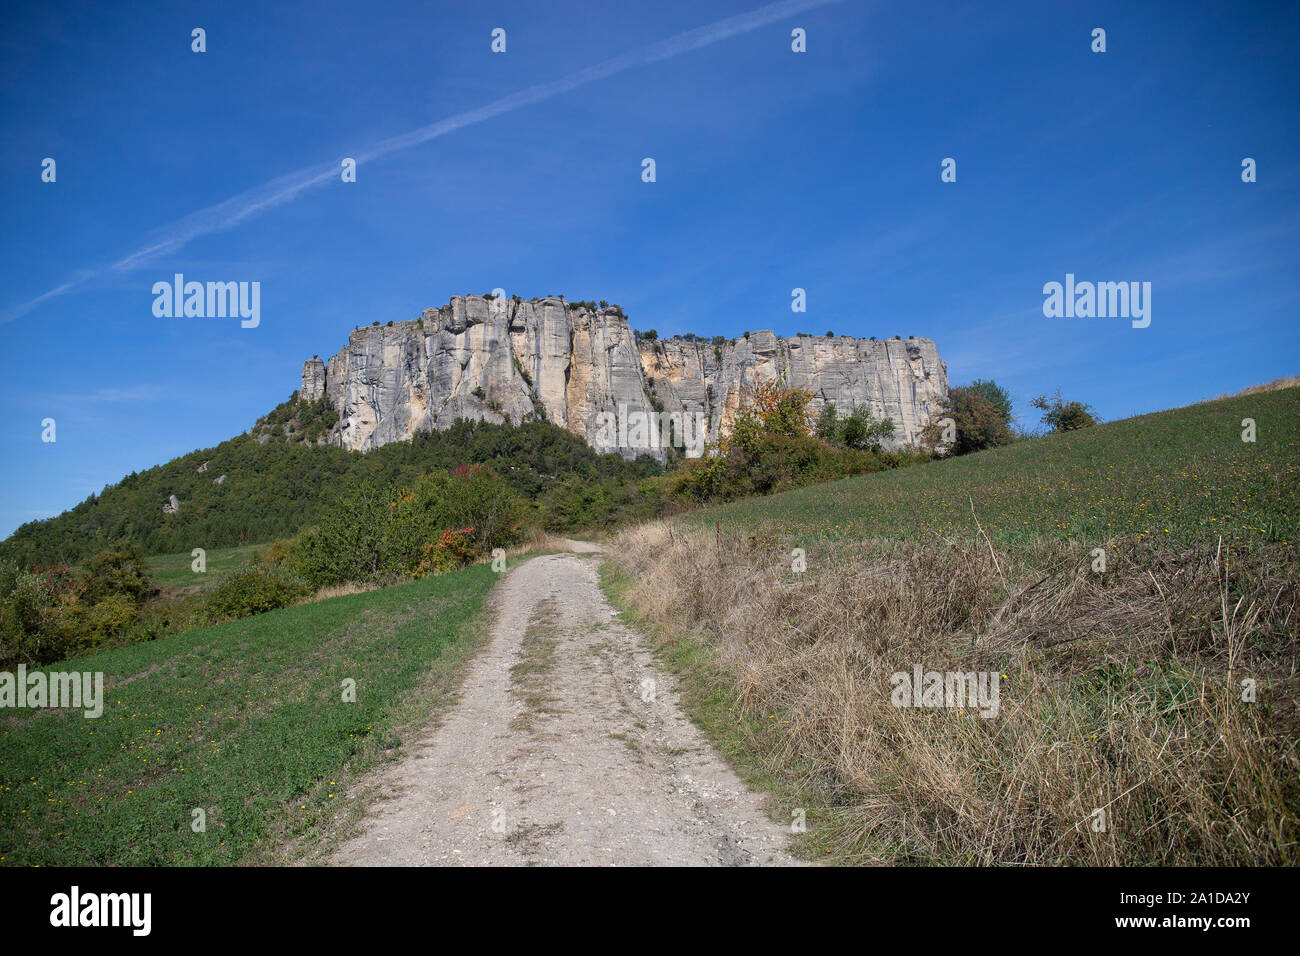 The stone of Bismantova, an isolated impressive spur in the italian appenines region. View from the rural path in the fields. Stock Photo